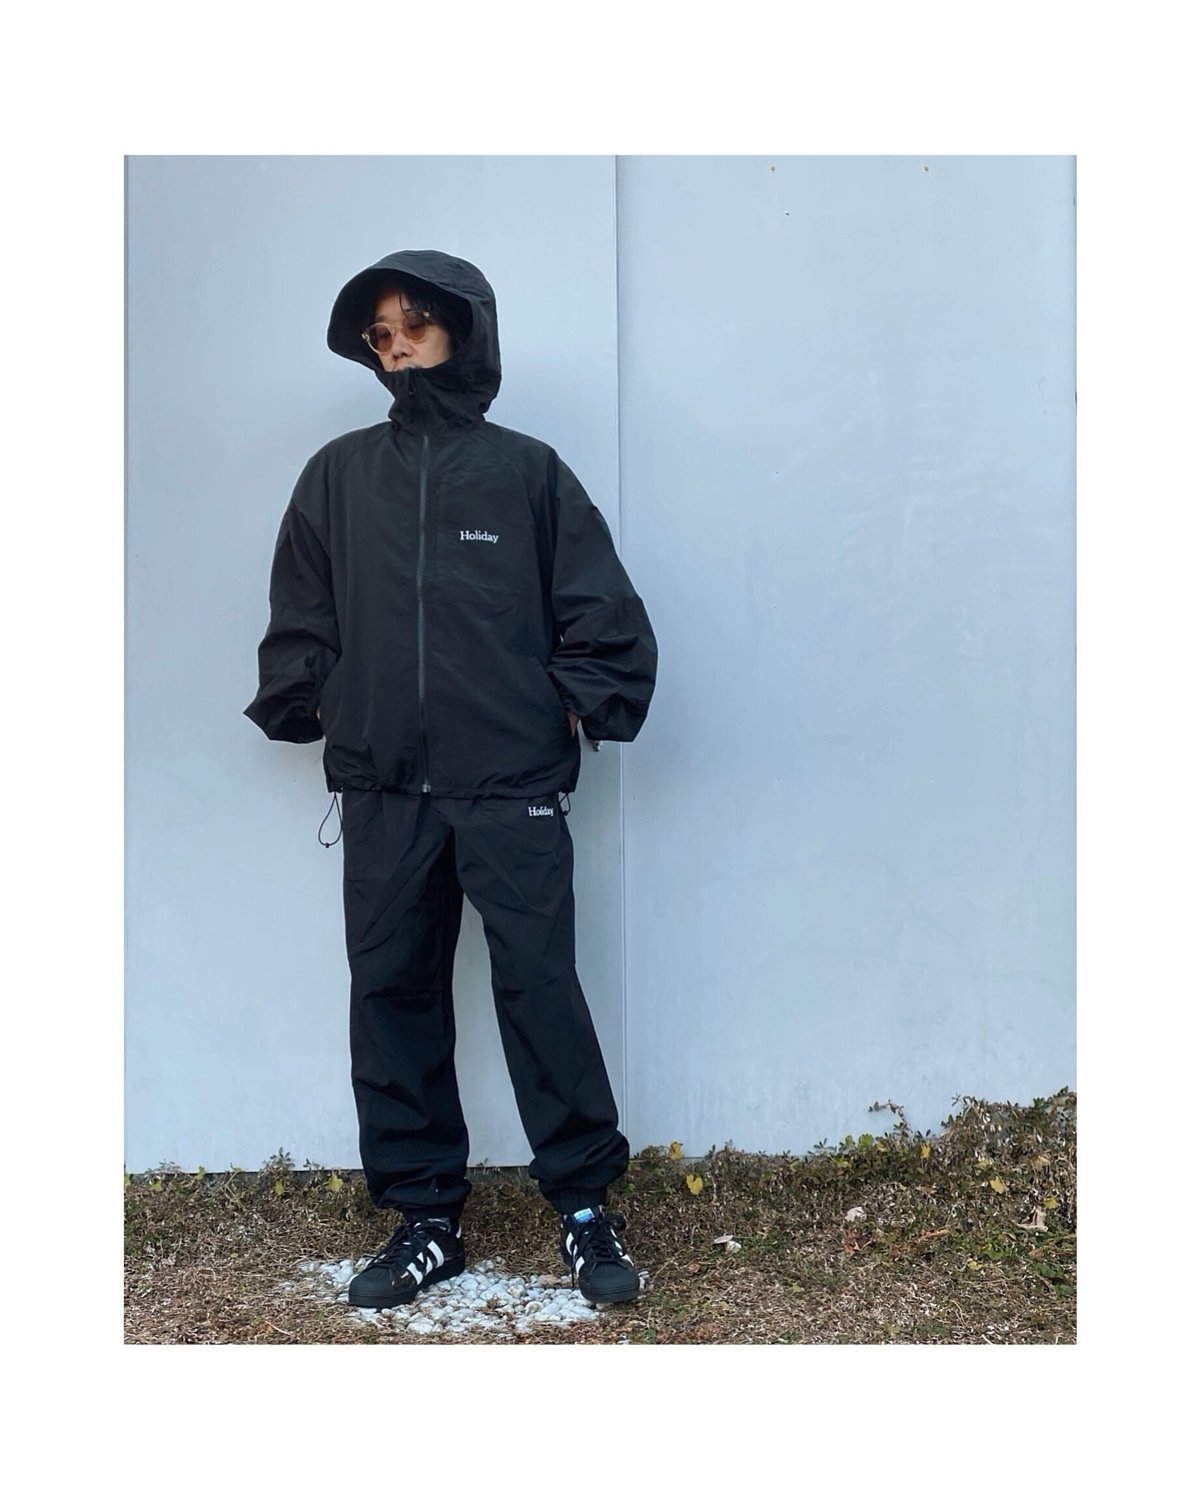 HOLIDAY「WIND JACKET（Holiday）」black. | gouter le...